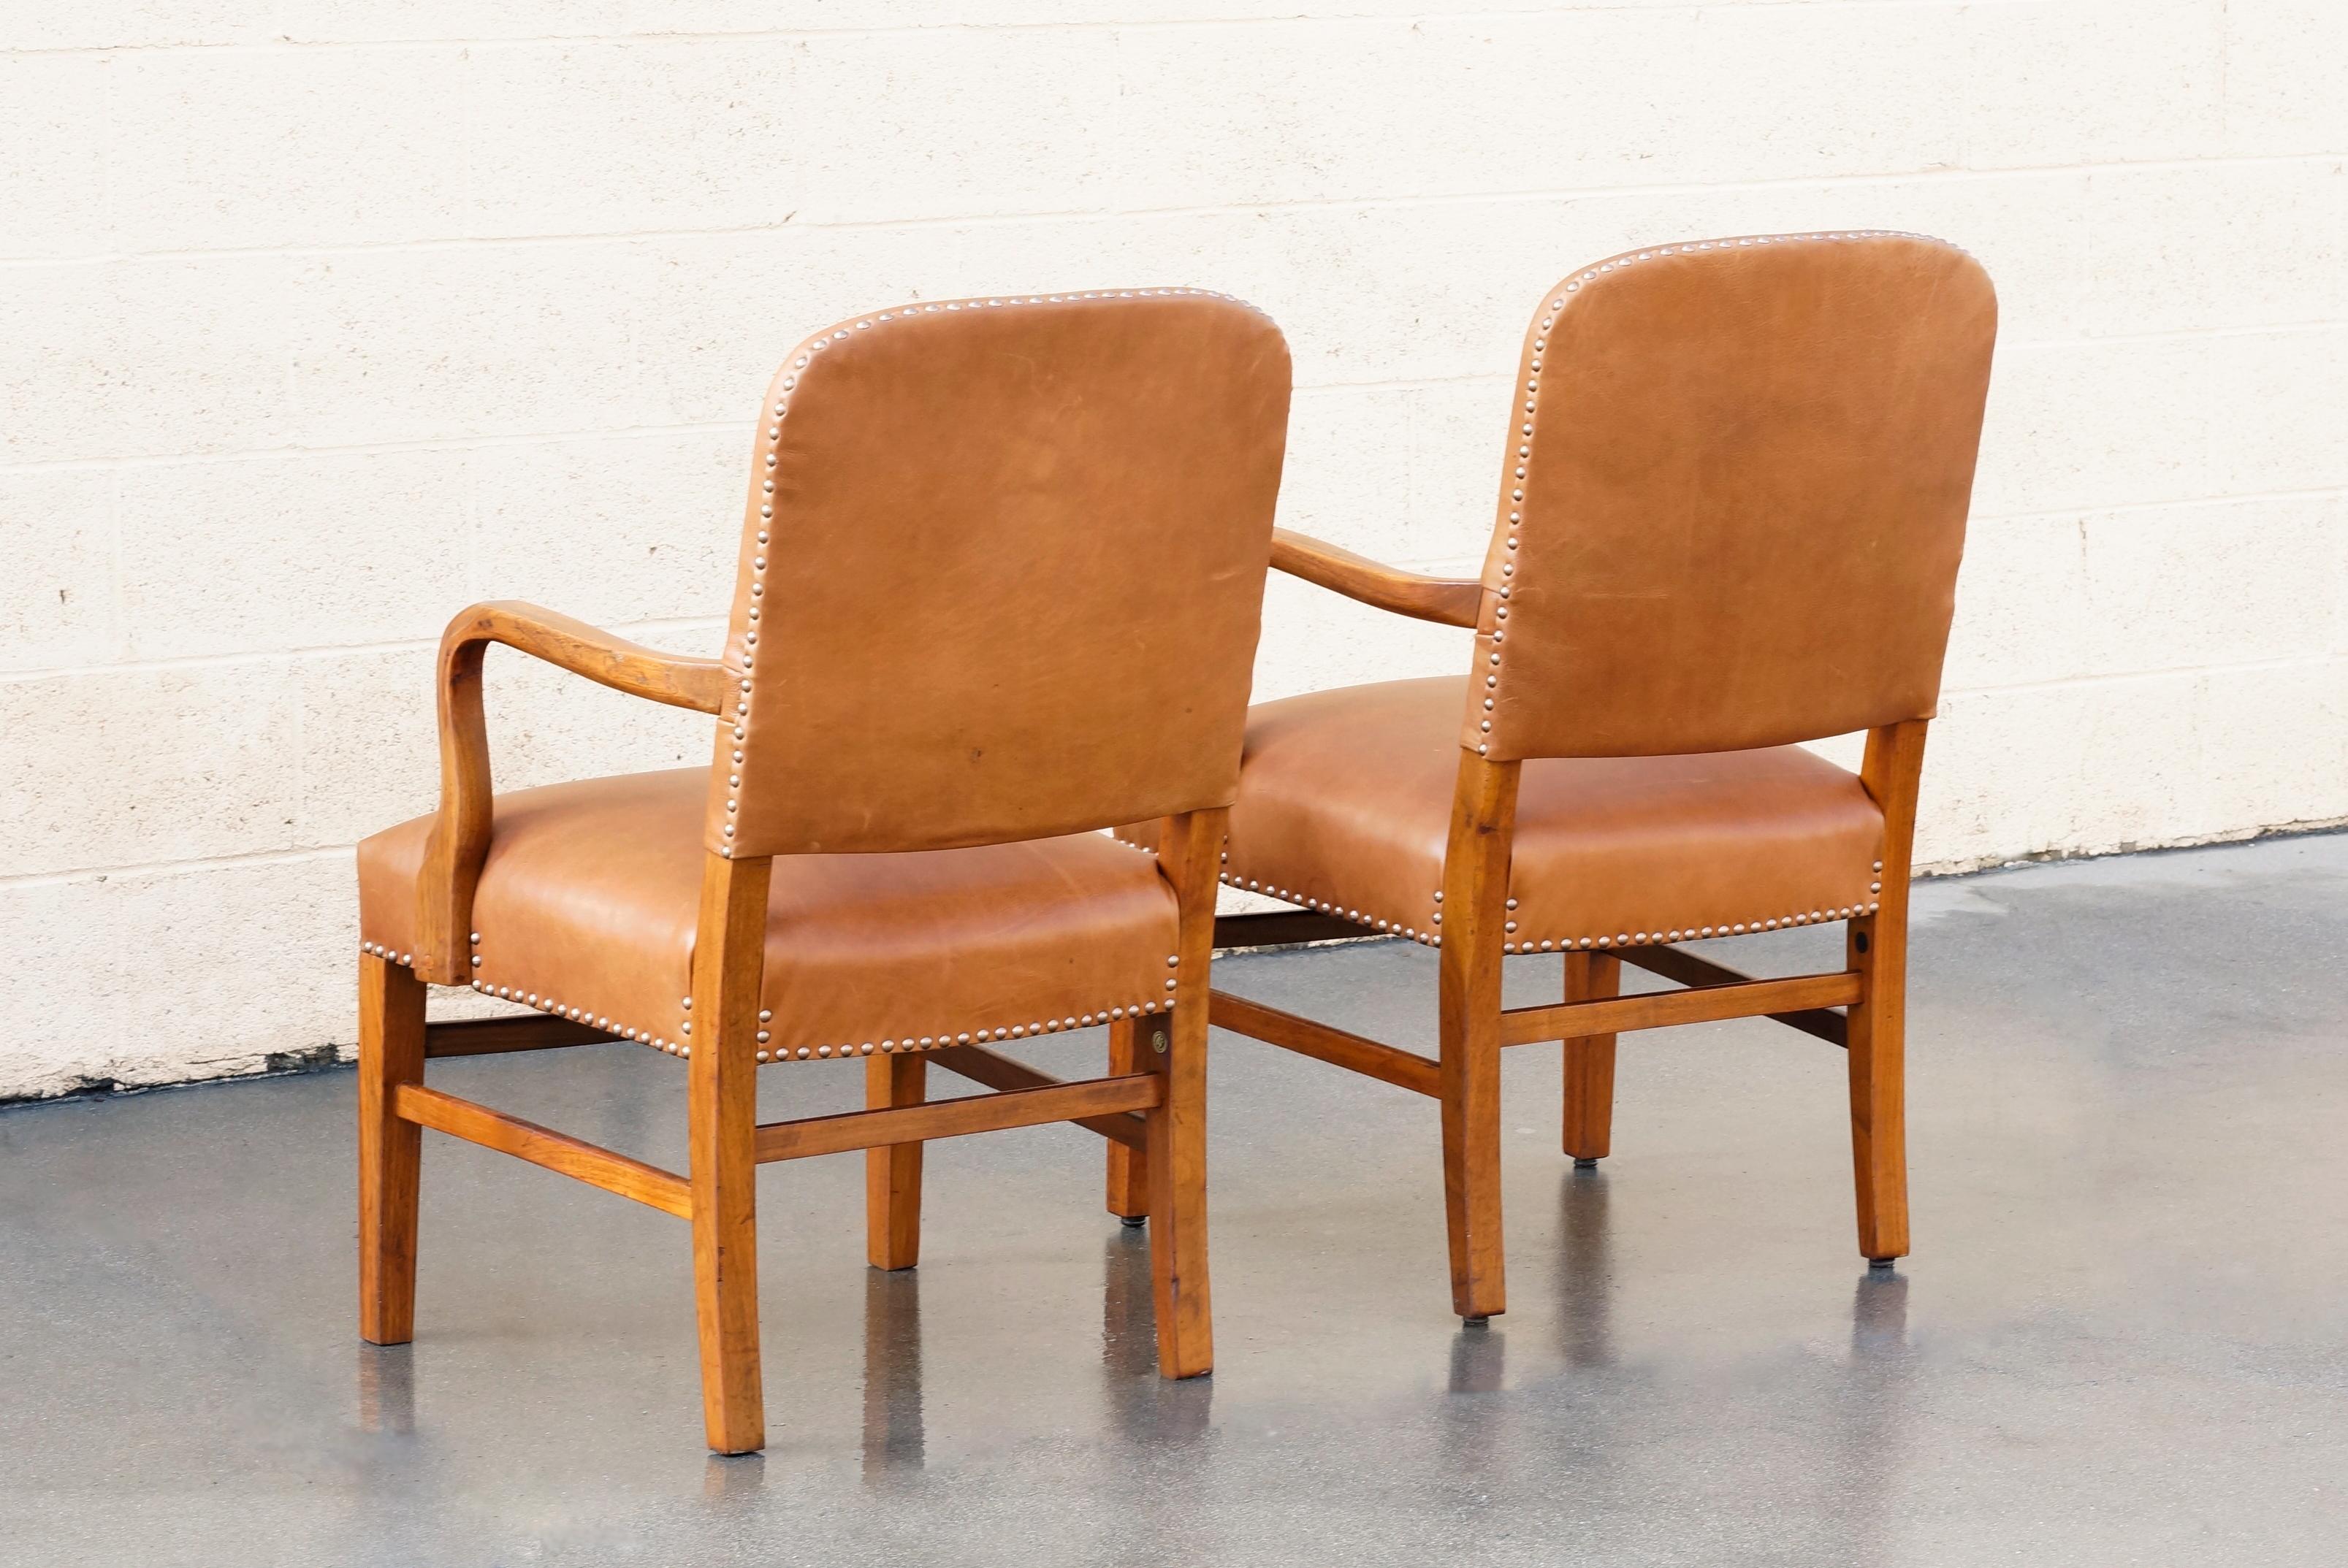 Stately pair of Gunlocke armchairs from 1948. Refinished oak and reupholstered in camel-colored leather with hammered upholstery tacks. Oak arms feature subtle carved detailing along the curves. Please note: foot risers have been replaced, not